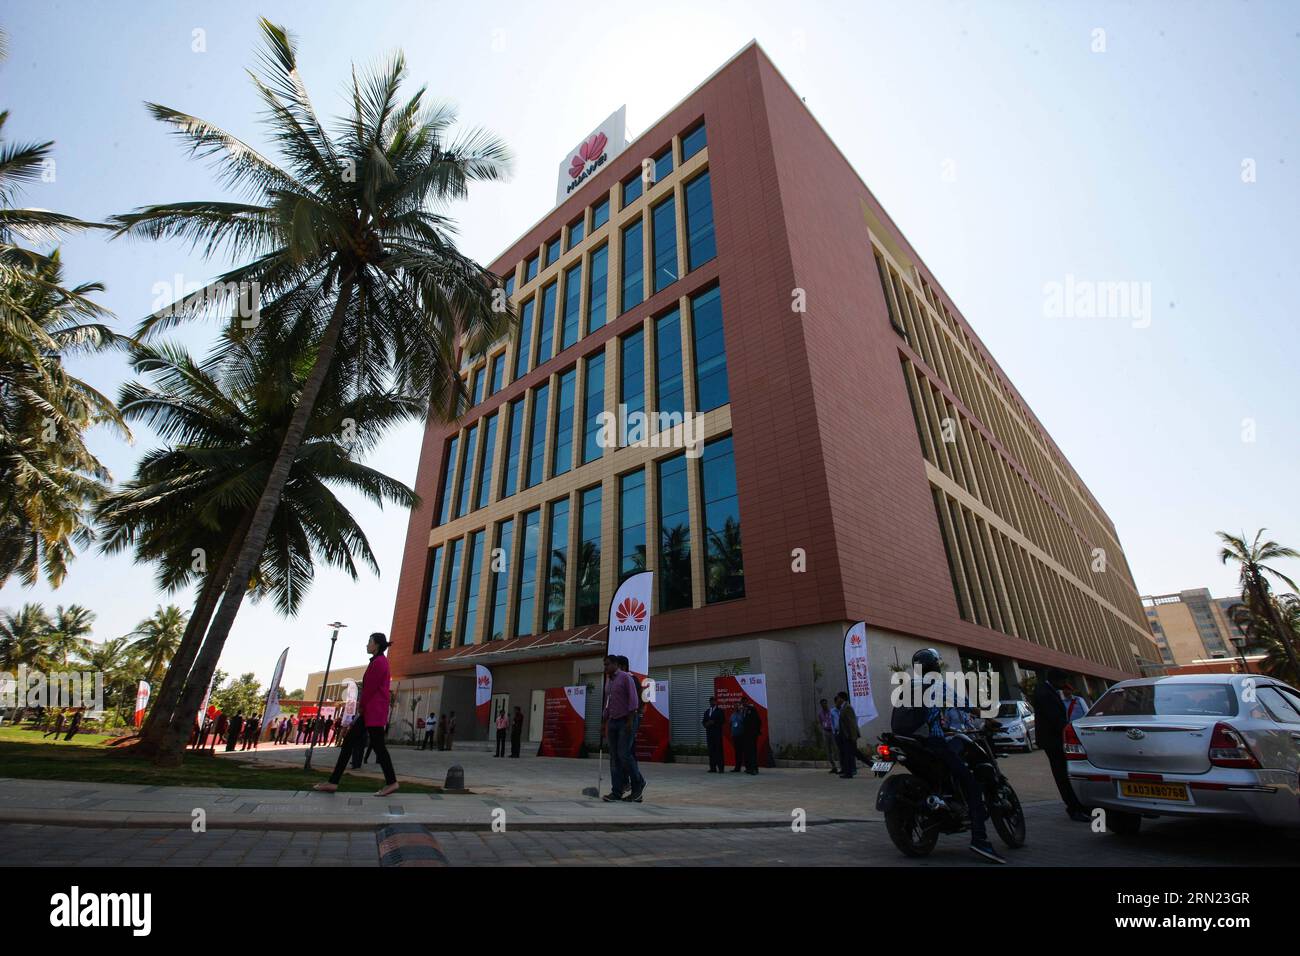 (150205) -- BENGALURU, Feb. 5, 2015 -- People walk outside Huawei s new research and development center in Bengaluru, India, Feb. 5, 2015. Chinese multinational networking and telecommunications equipment and services company Huawei on Thursday launched its new research and development center in Bengaluru. With an investment of 170 million U.S. dollars and an area of 20 acres, it is the largest research and development center of Huawei outside China. )(azp) INDIA-BENGALURU-CHINA-ICT-HUAWEI ZhengxHuansong PUBLICATIONxNOTxINxCHN   Feb 5 2015 Celebrities Walk outside Huawei S New Research and Dev Stock Photo